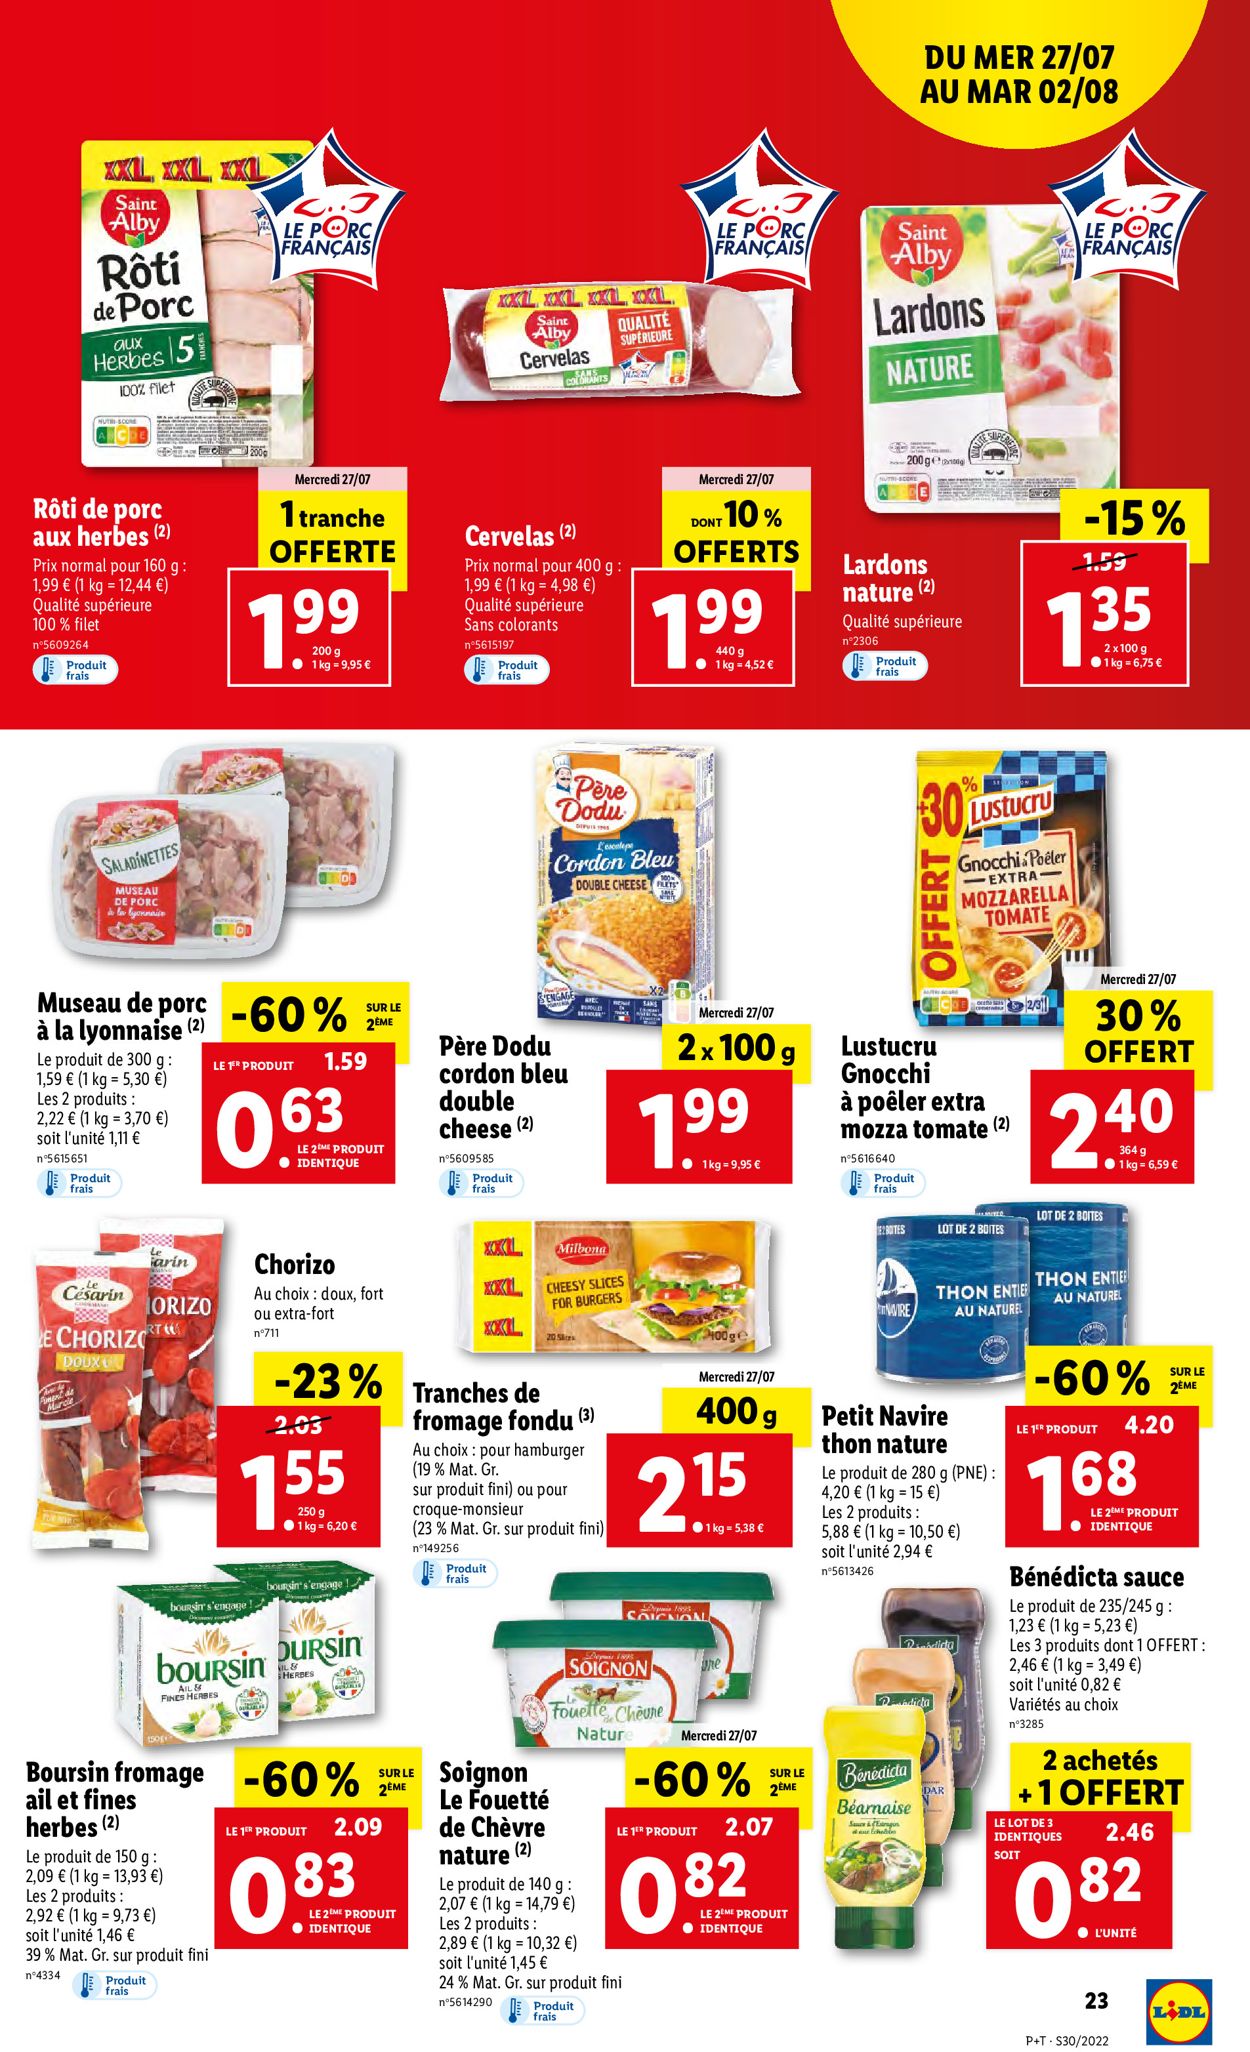 Lidl Catalogue - 27.07-02.08.2022 (Page 25)